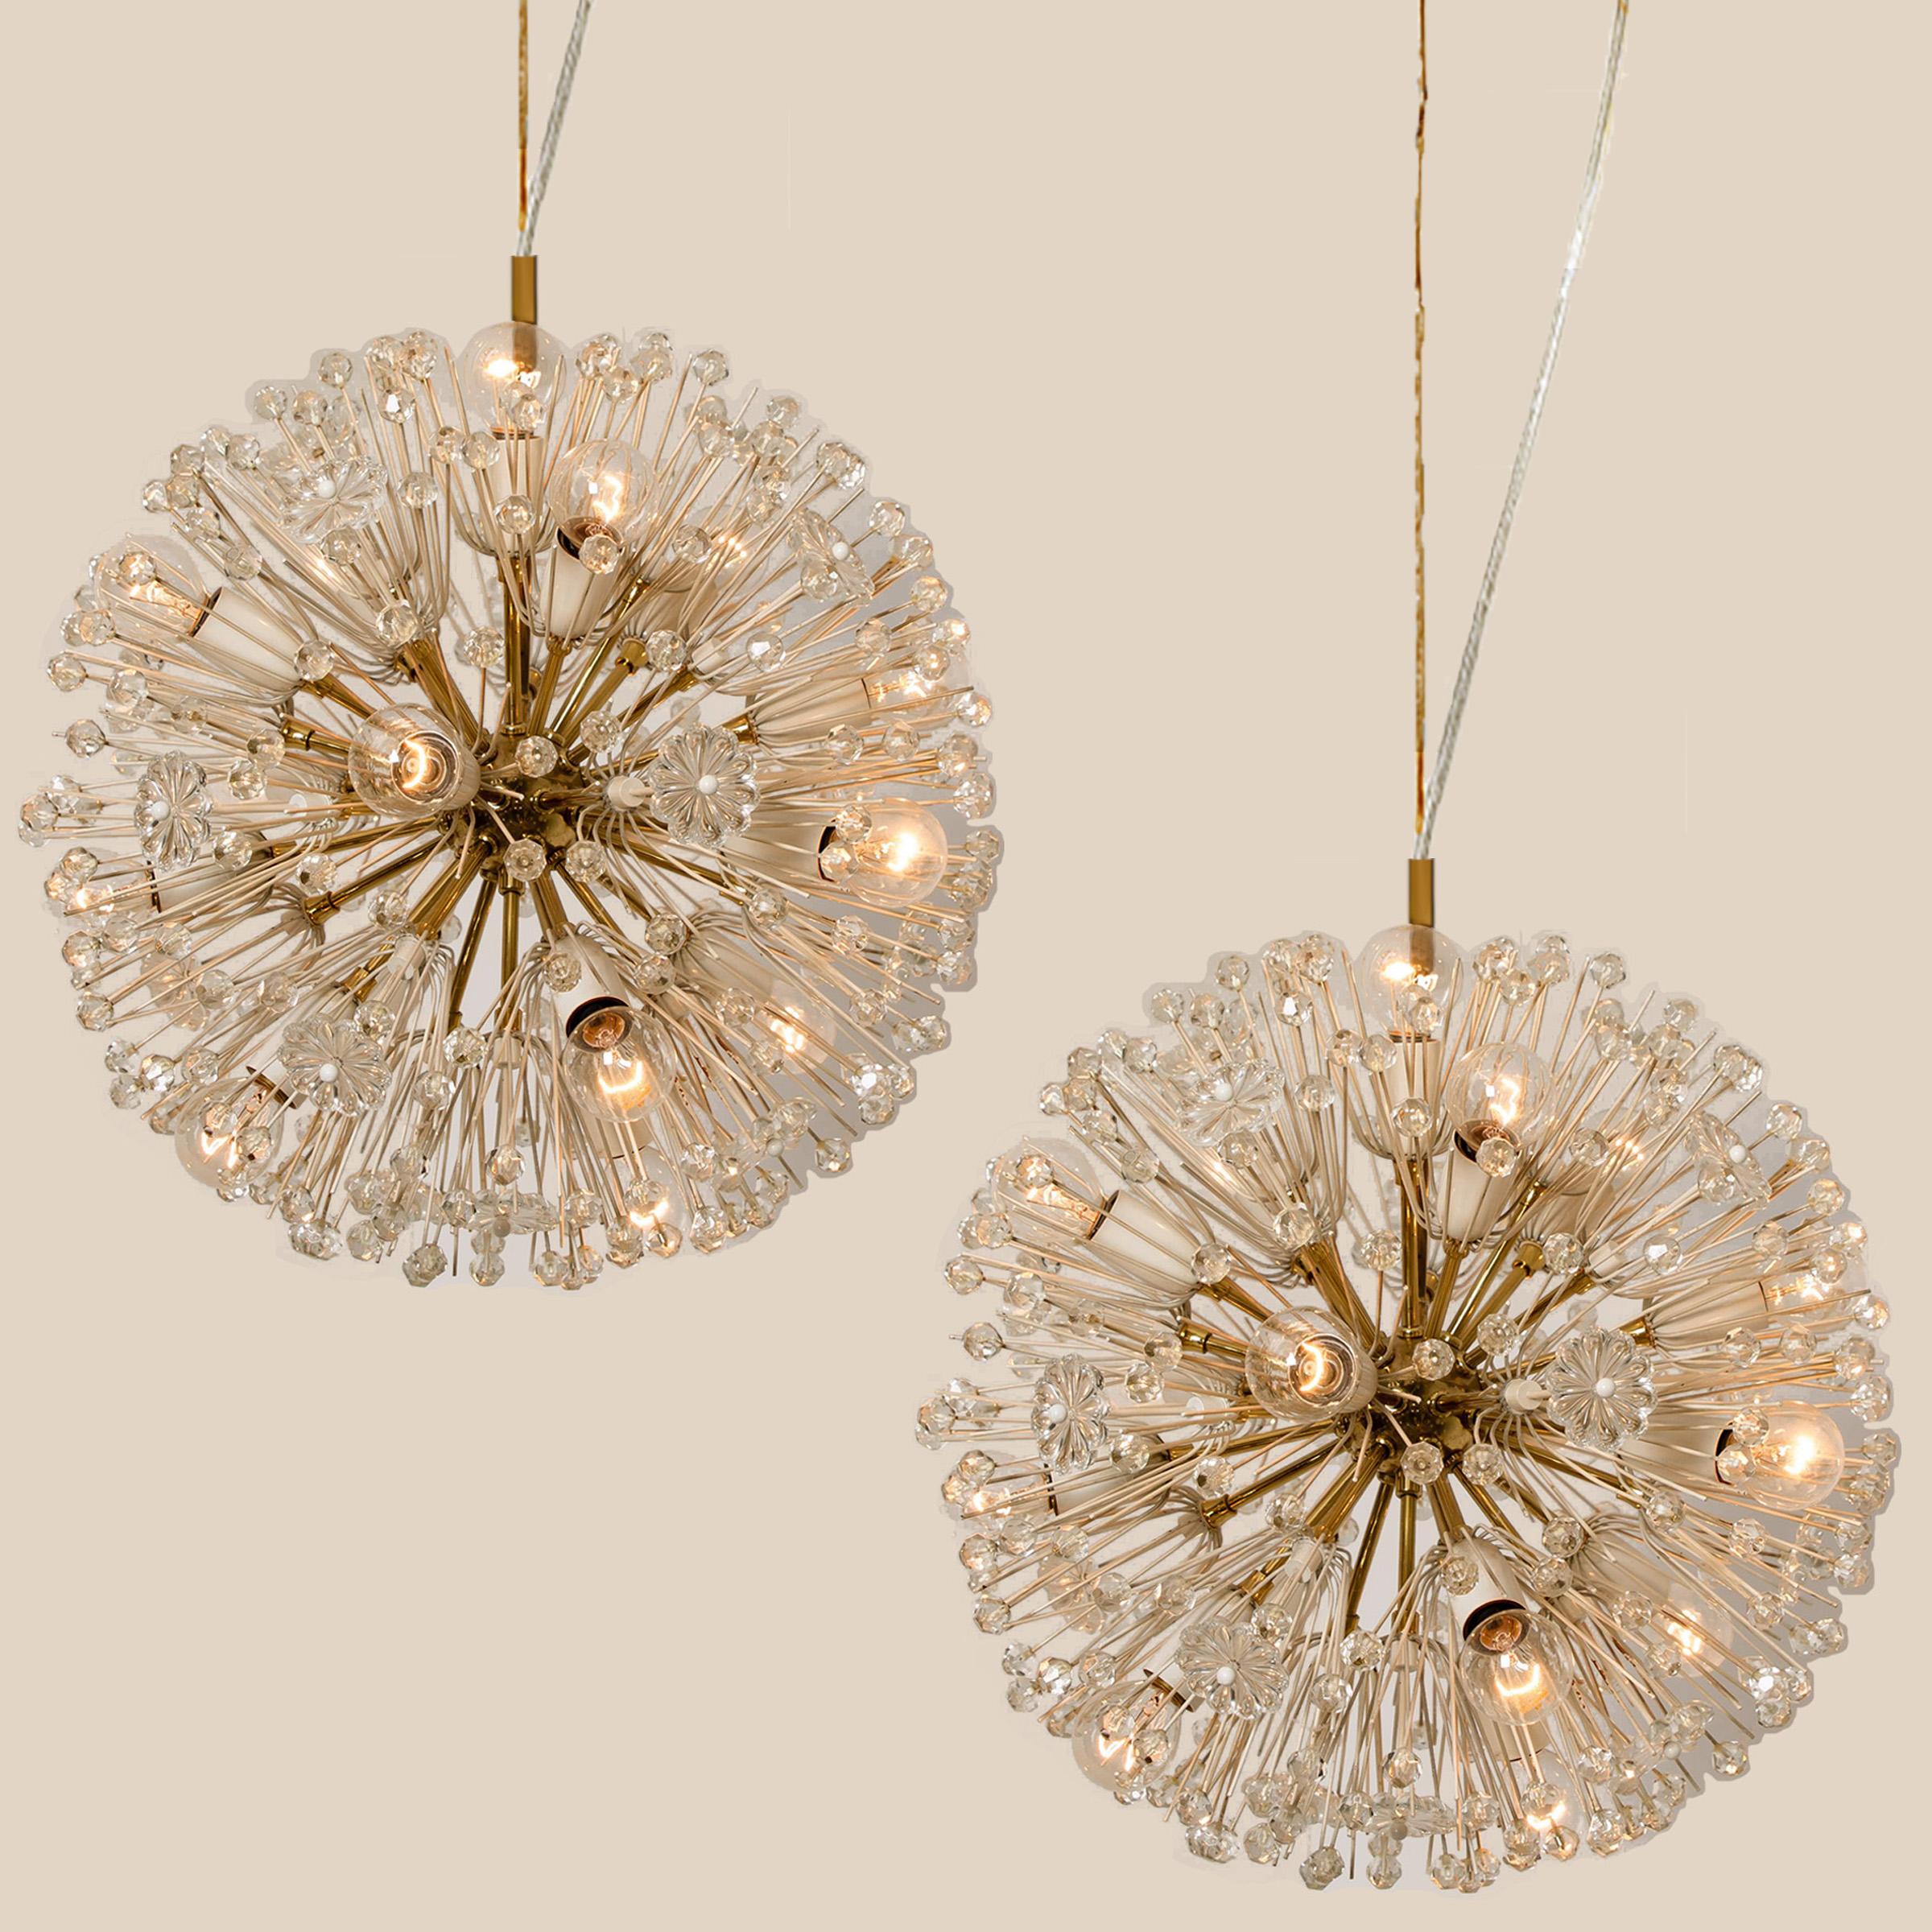 A magnificent pair of light brass Sputnik fixtures with copious amounts of Austrian crystals by Emil Stejnar for Nikoll. Cosmological.
This glamorous delicate brass ‘Snowball’ Sputnik light fixtures are also known as ‘pusteblume’ or ‘snowflake’ and